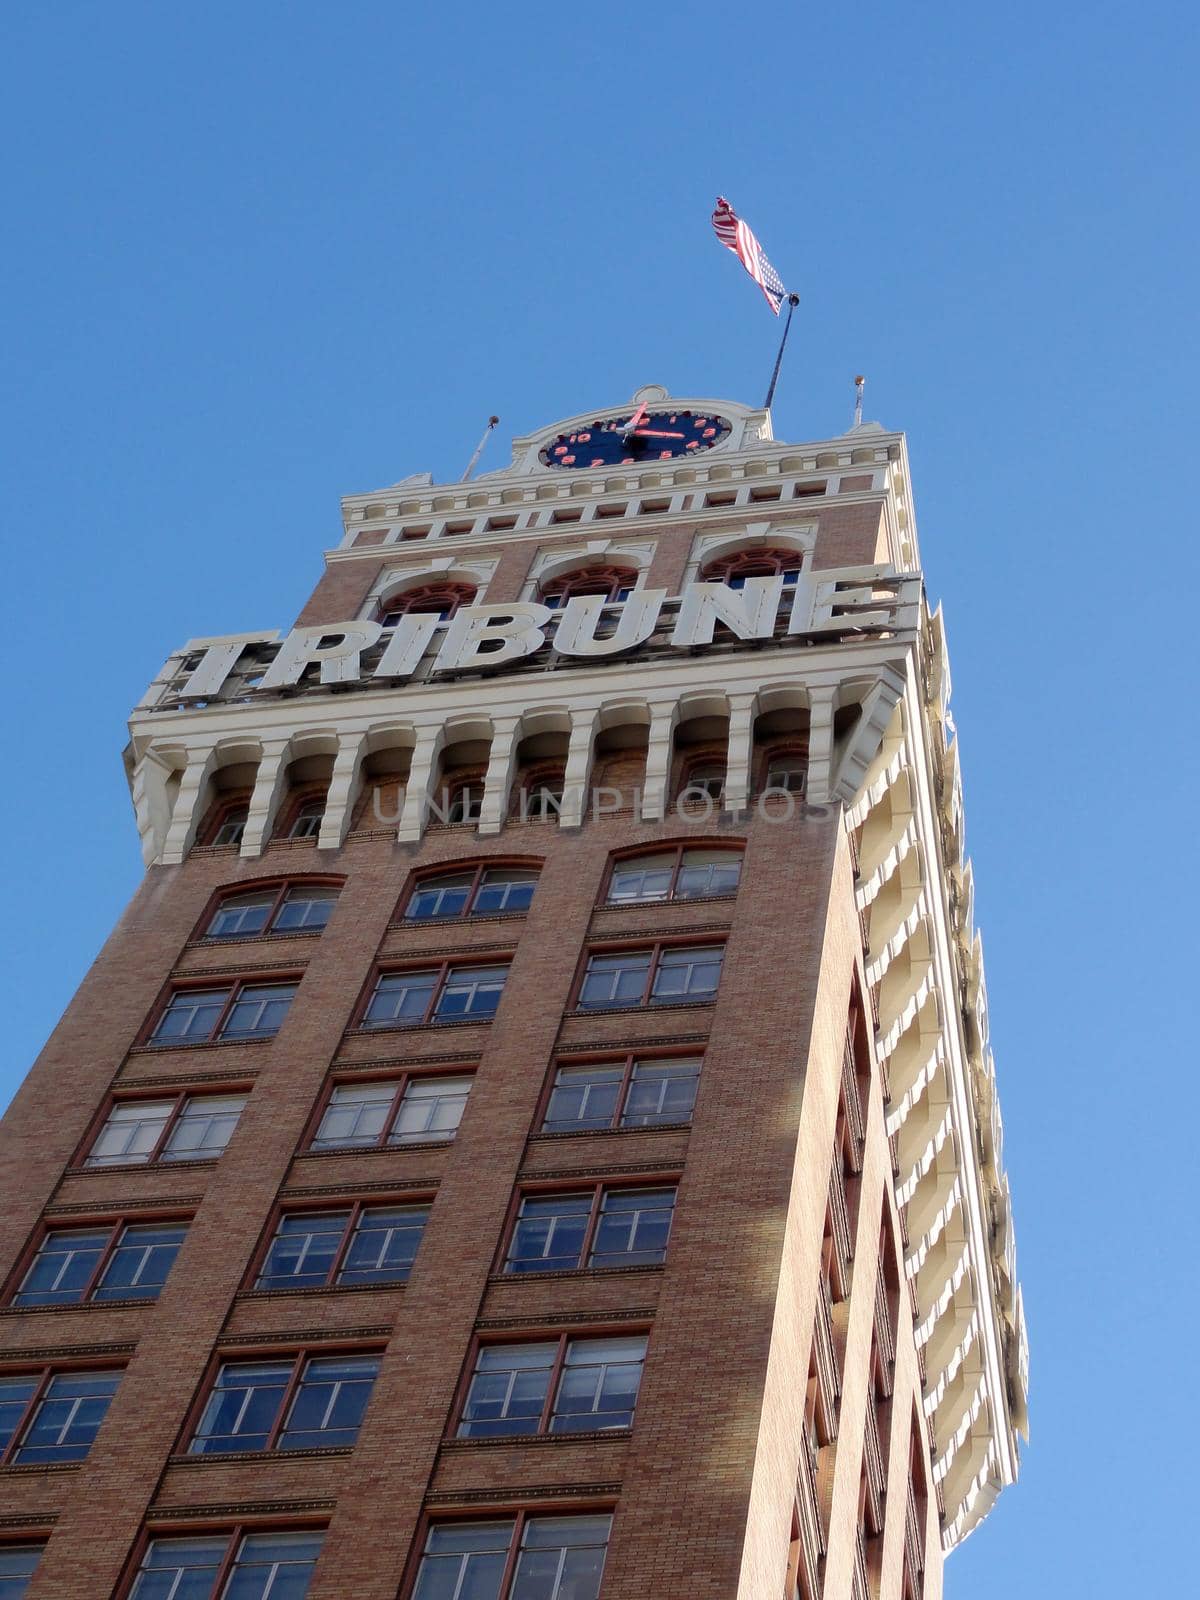 Oakland Tribune Clock Tower with USA Flag by EricGBVD